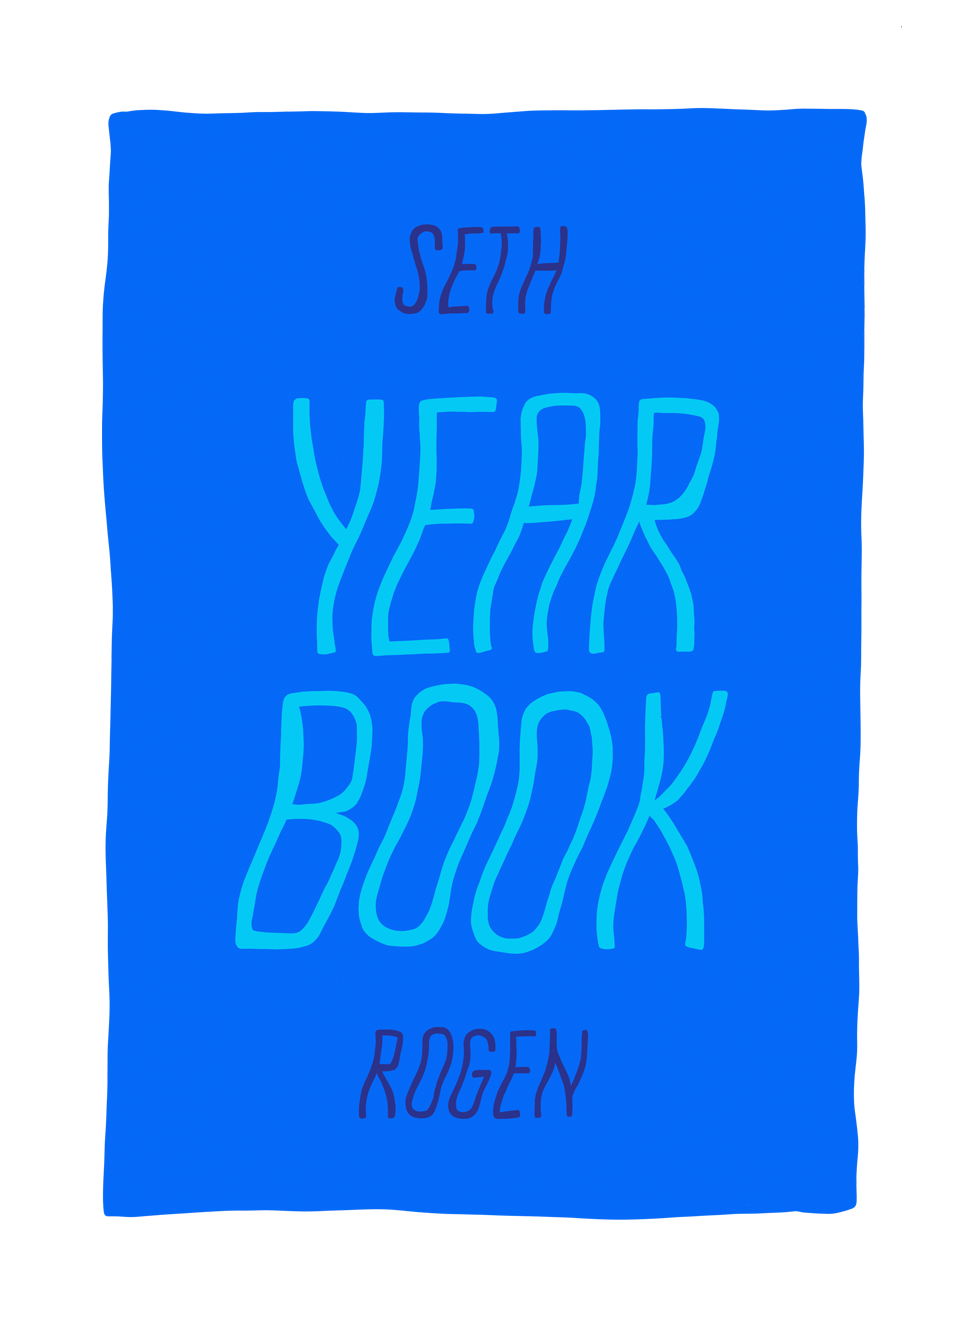 Year Book by Seth Rogen  | illustrated by Alicia Carvalho